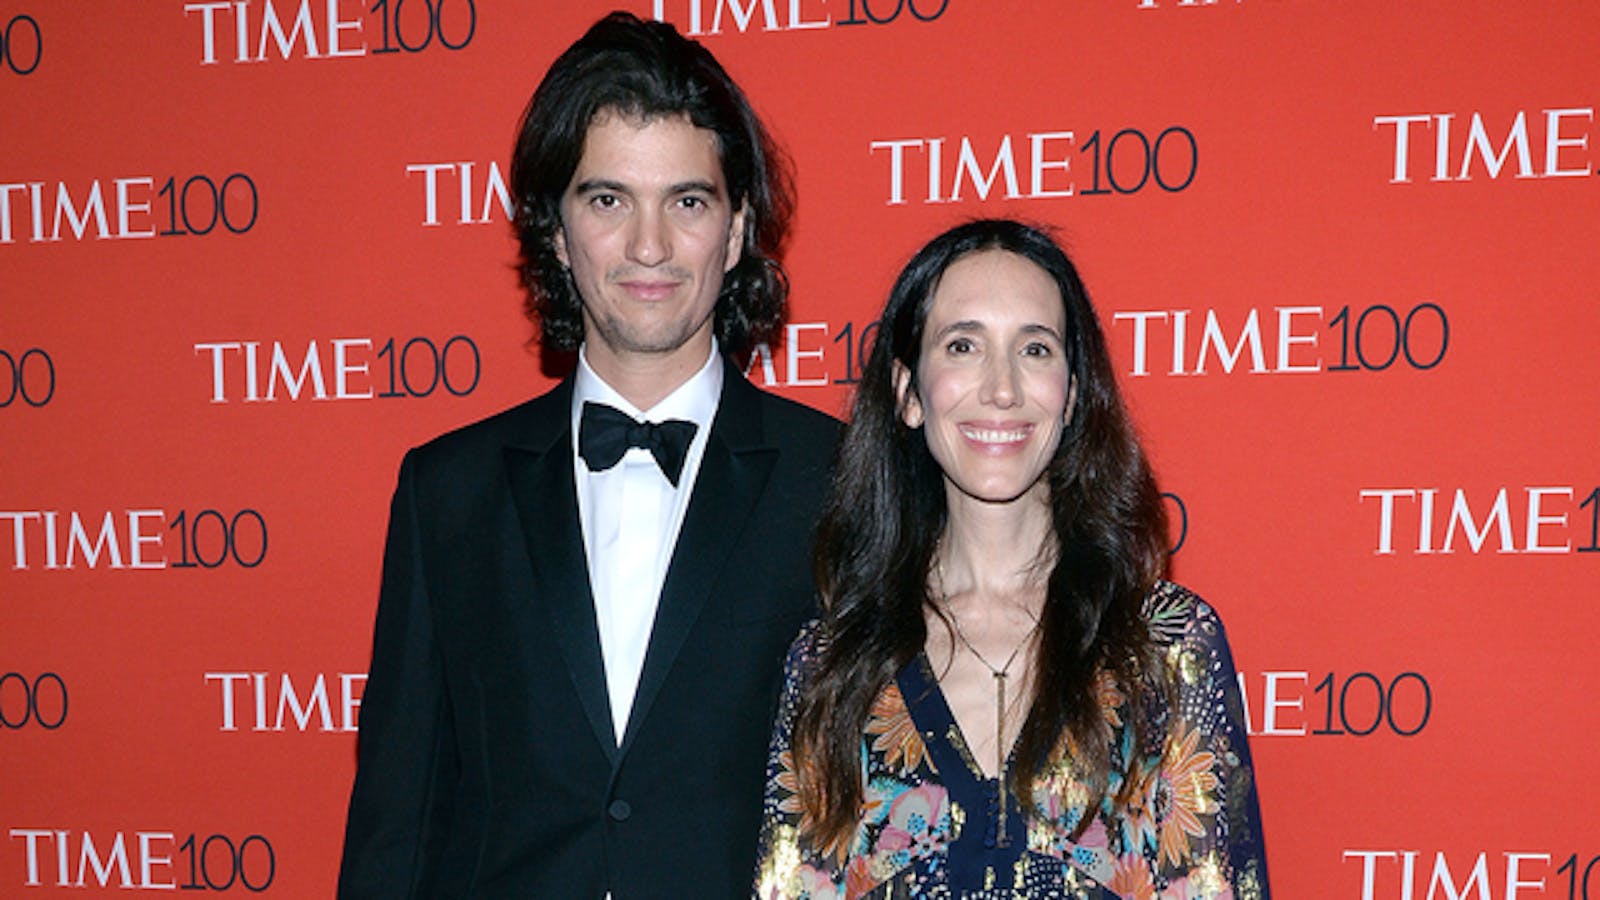 WeWork's former CEO Adam Neumann and his wife Rebekah. Photo by AP